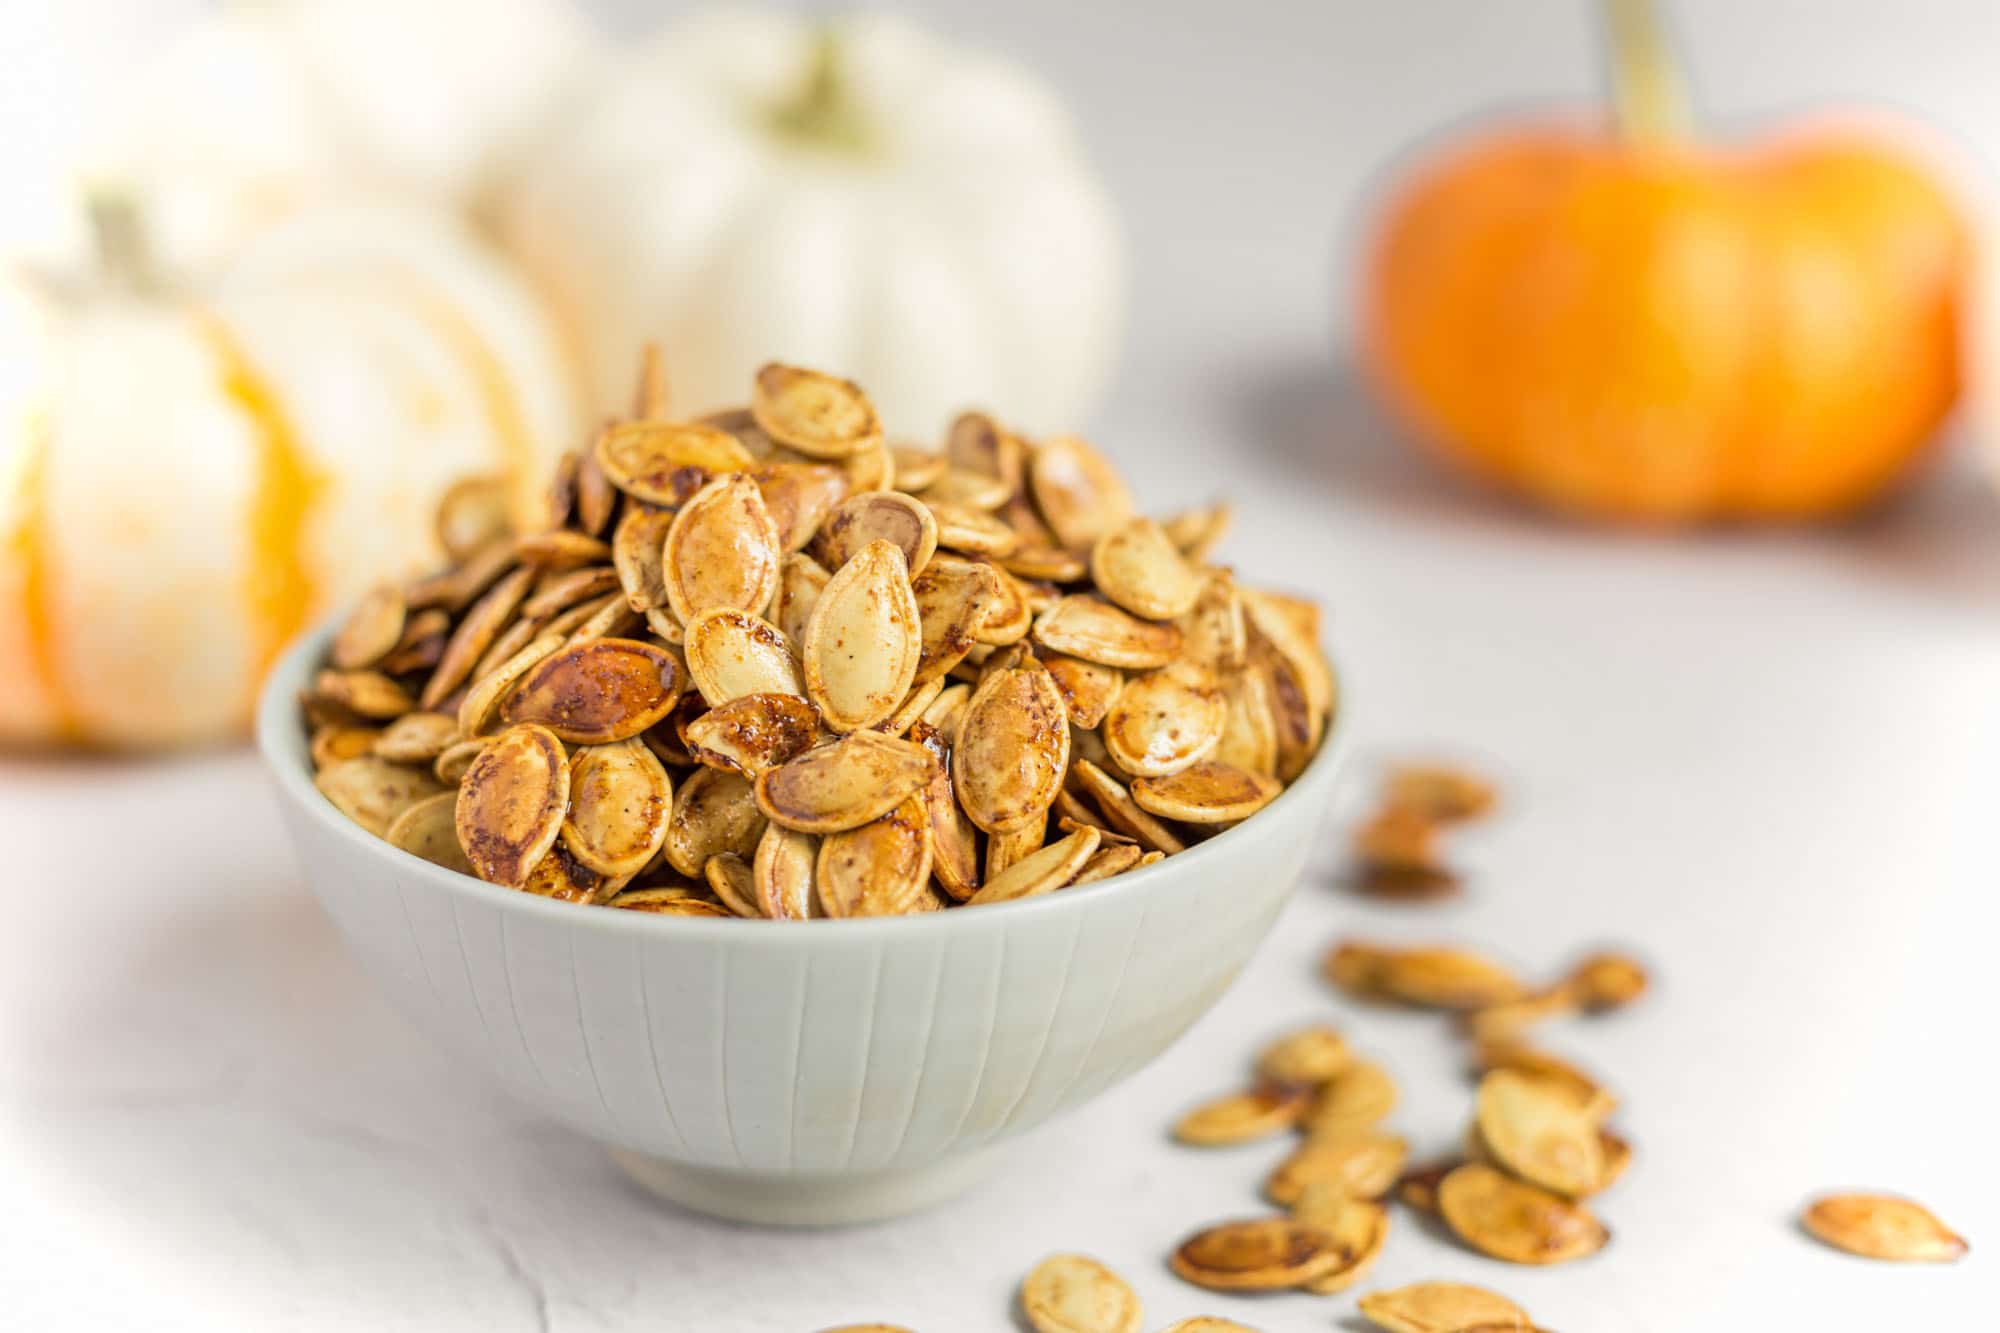 Best Roasted Pumpkin Seeds Recipe Served in a Bowl Surrounded by Pumpkins